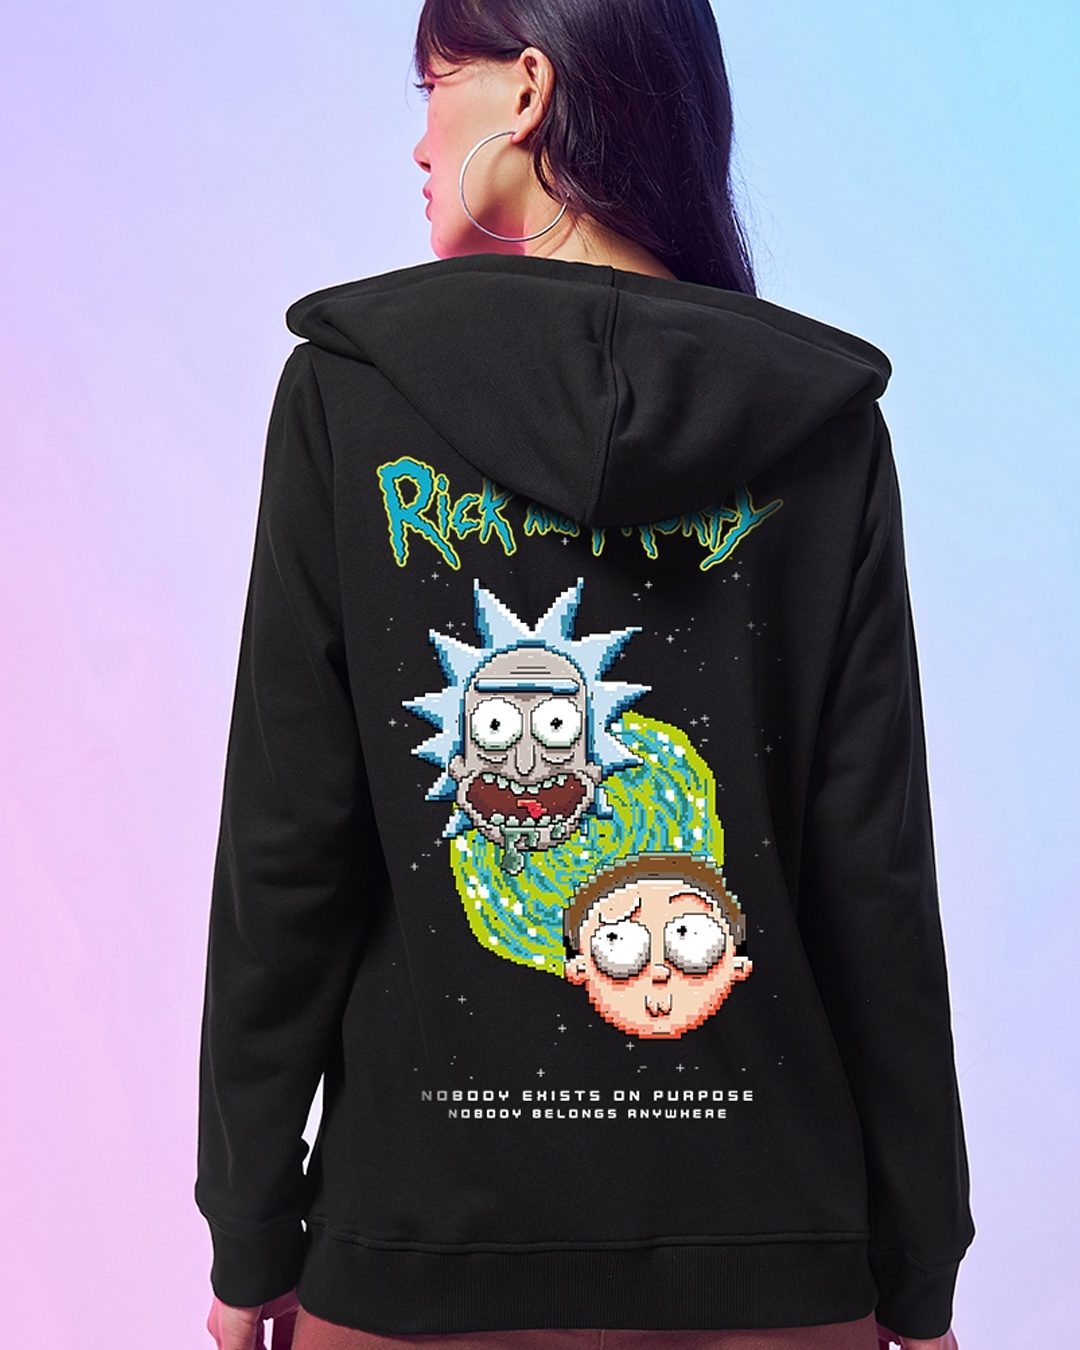 Women's Black Rick and Morty Graphic Printed Hoodies